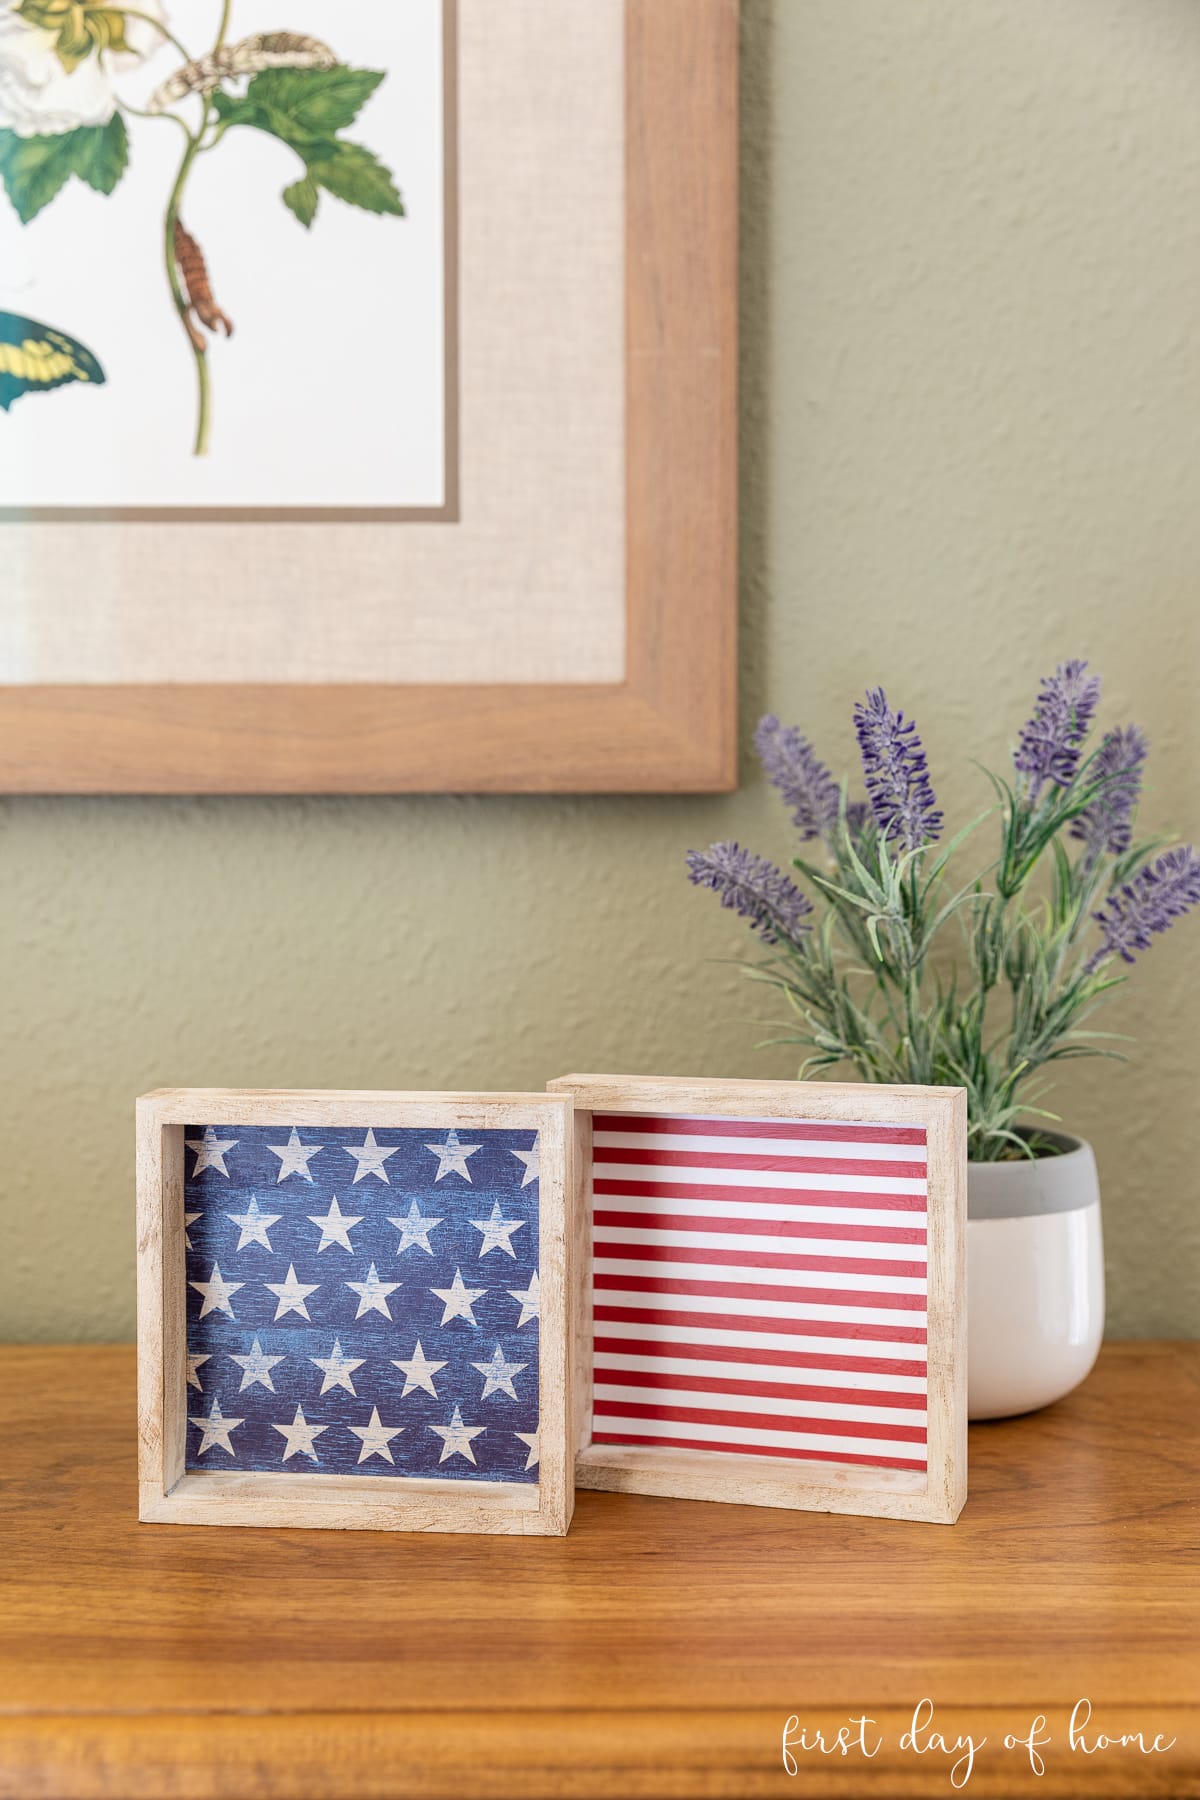 Two patriotic wood signs resembling a U.S. flag with stars and stripes motif sitting next to plant on table